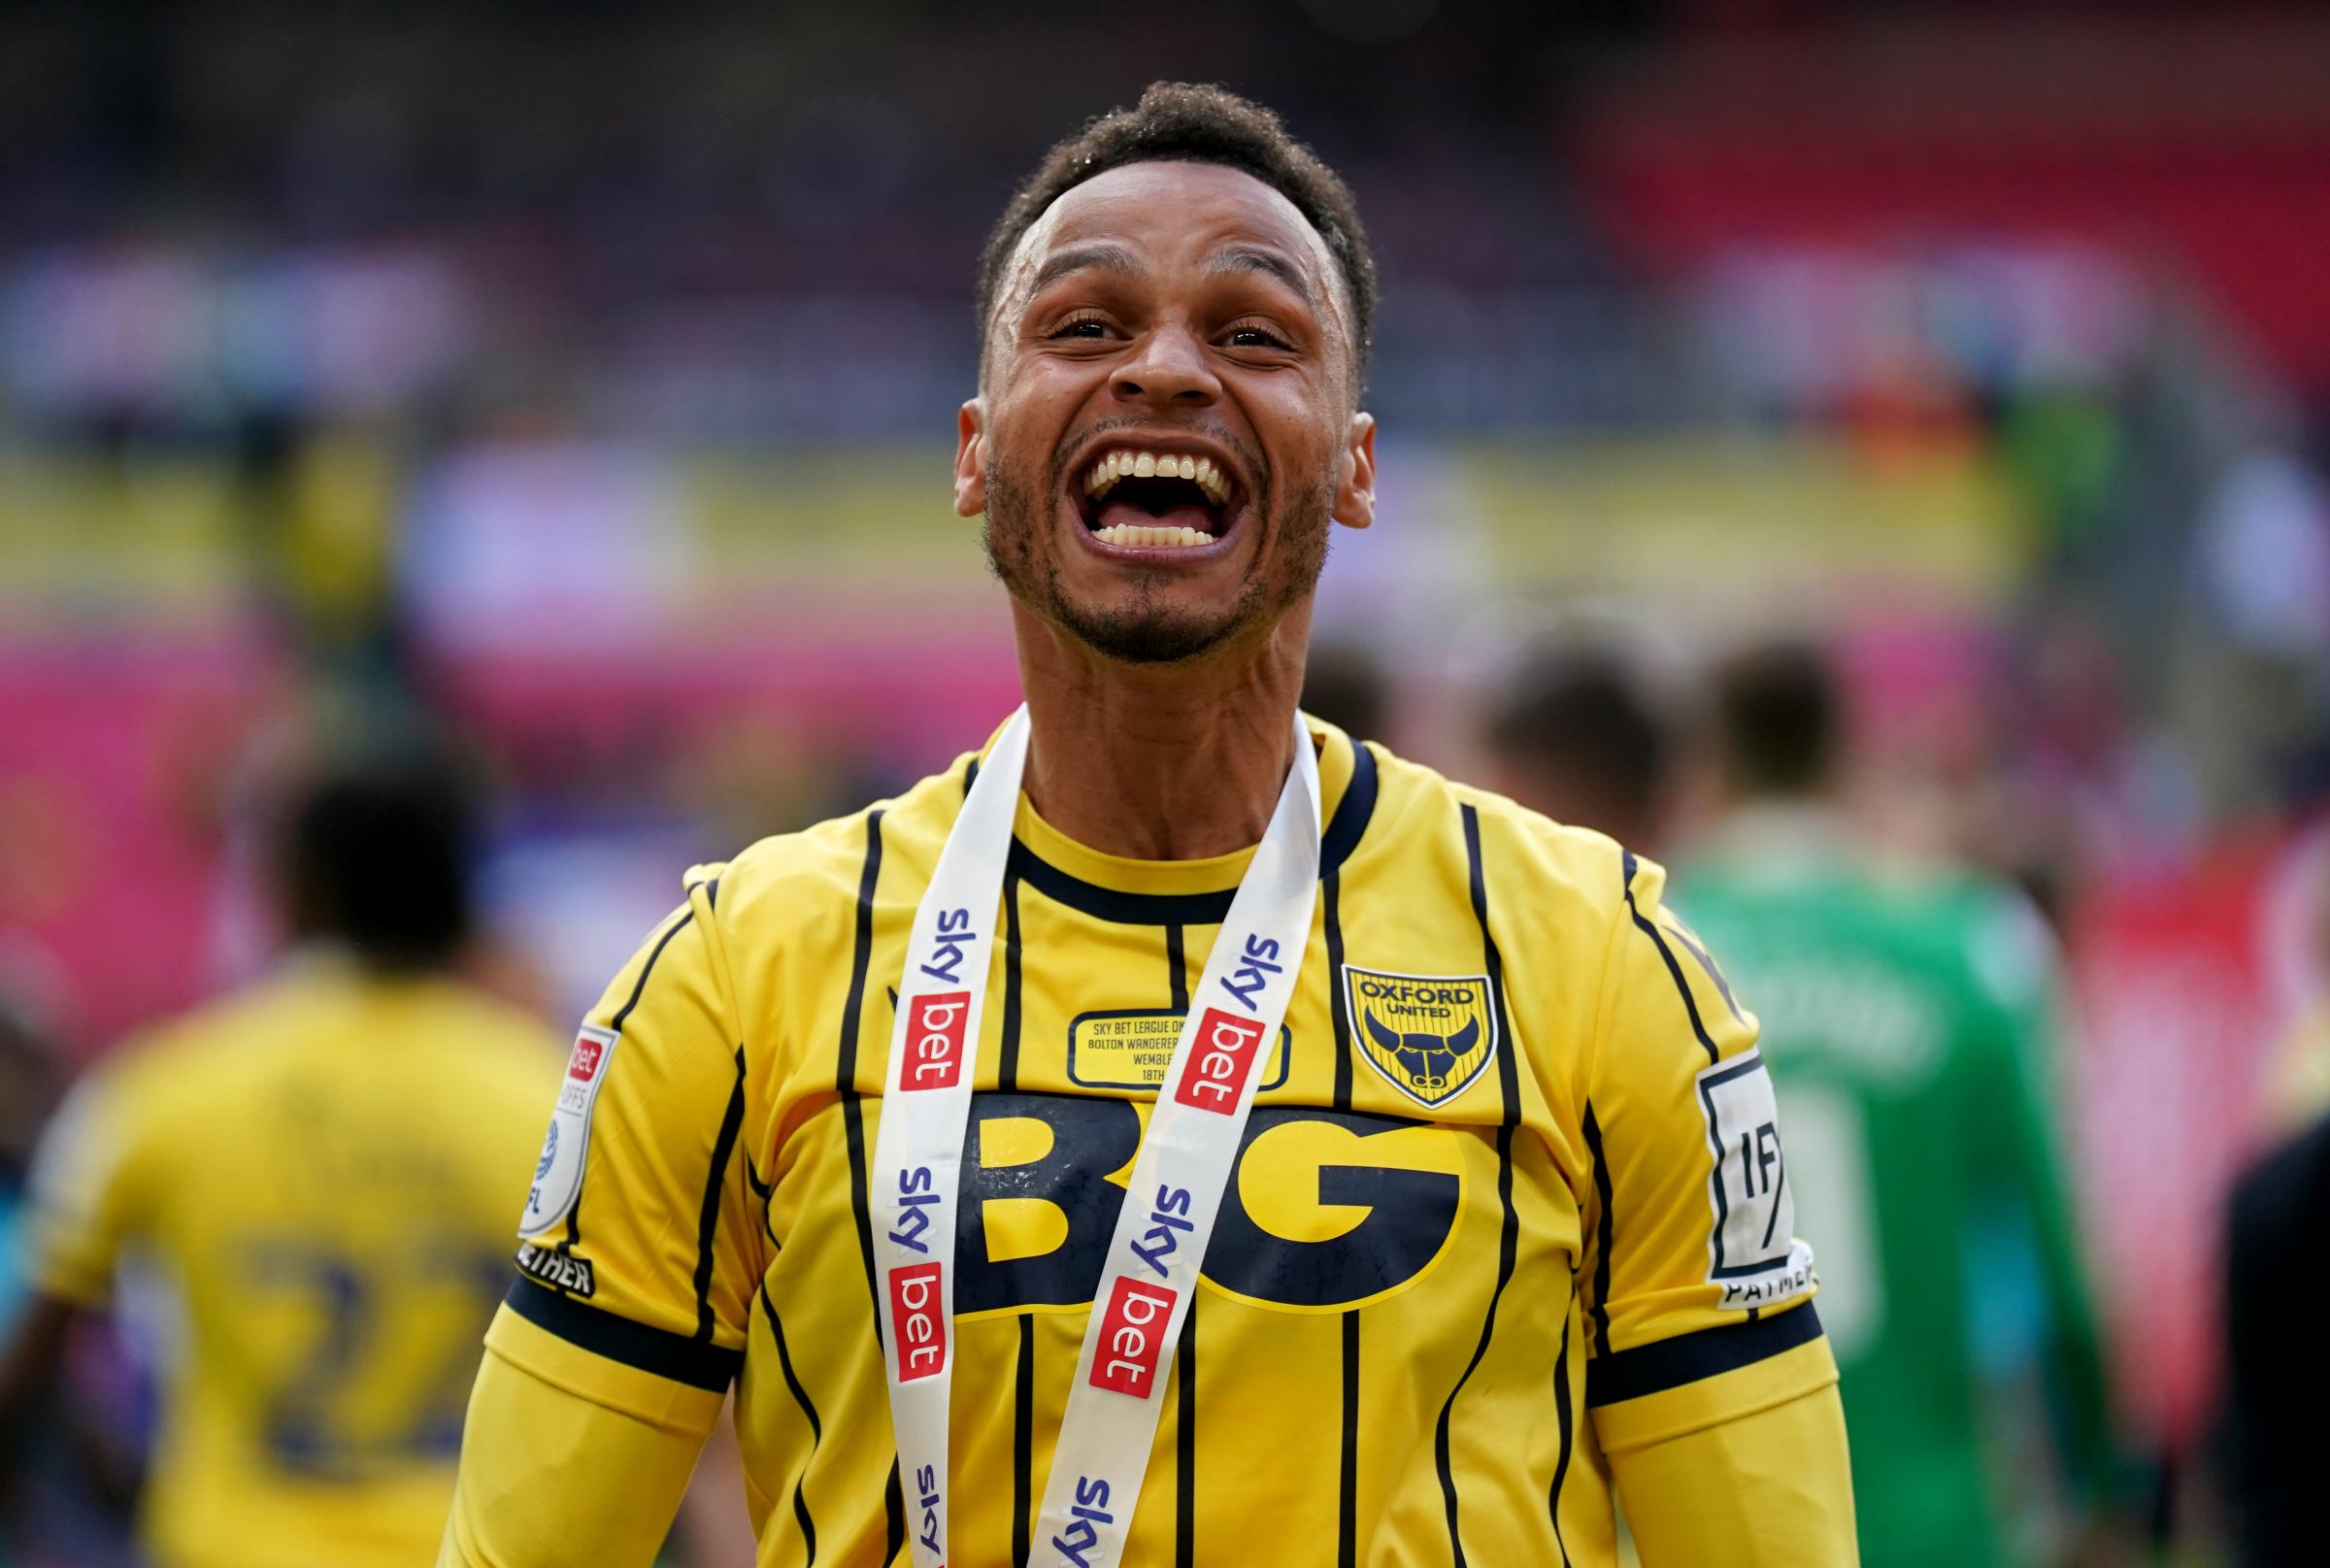 Oxford United's Josh Murphy taunts Thogden with viral video